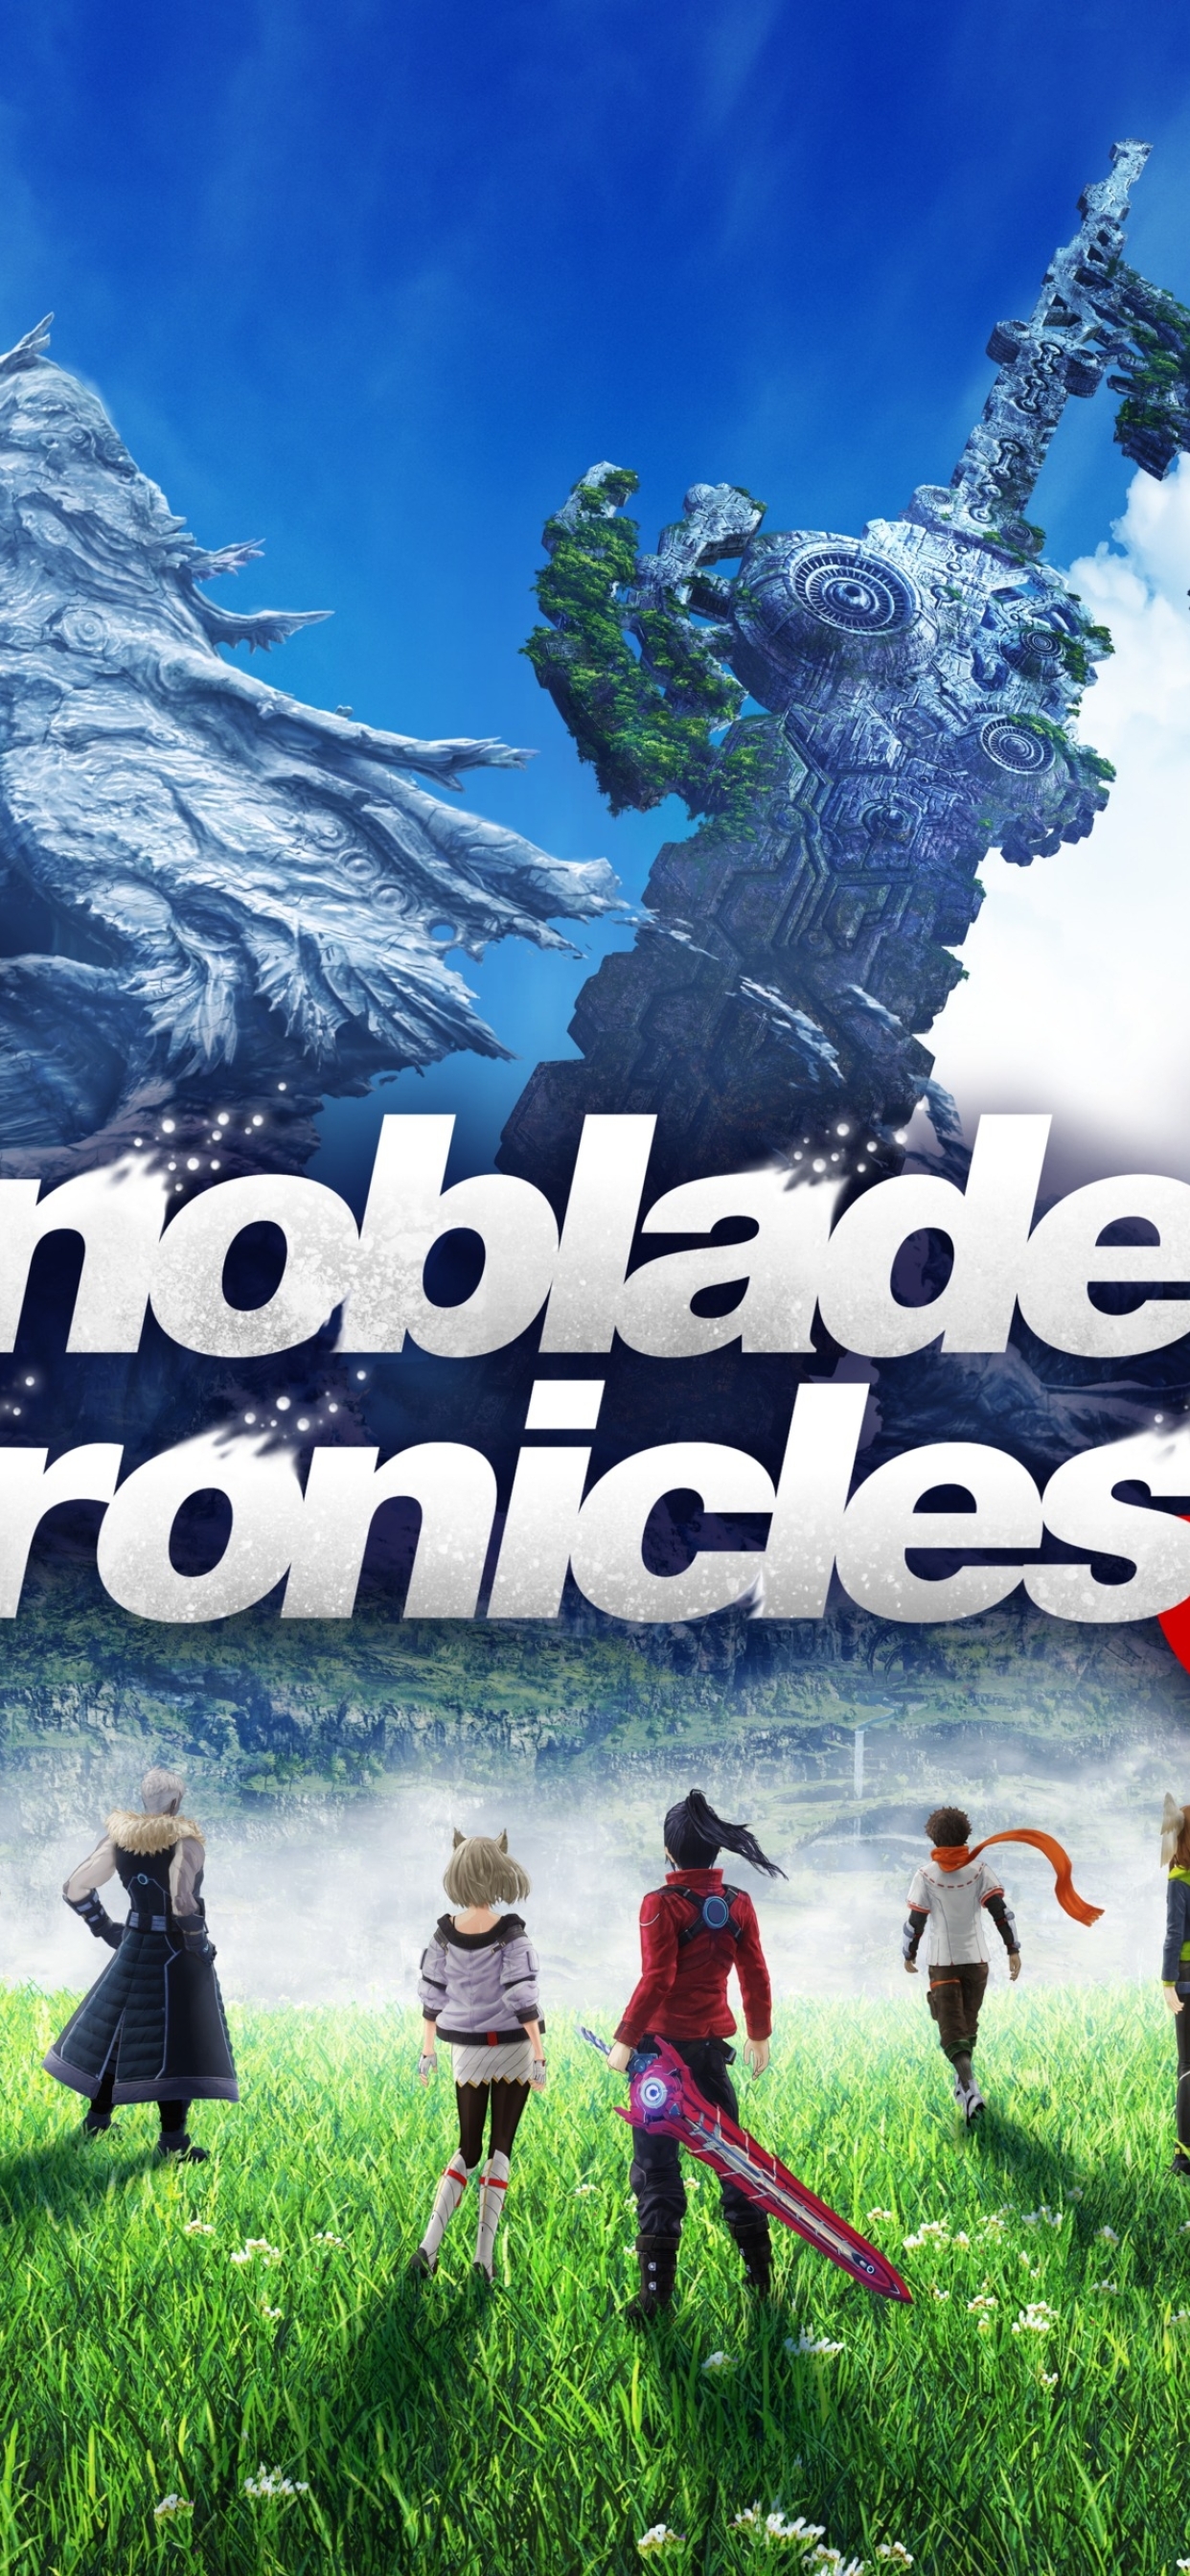 Monolith Soft shares new Xenoblade Chronicles 2 fifth anniversary wallpapers   My Nintendo News